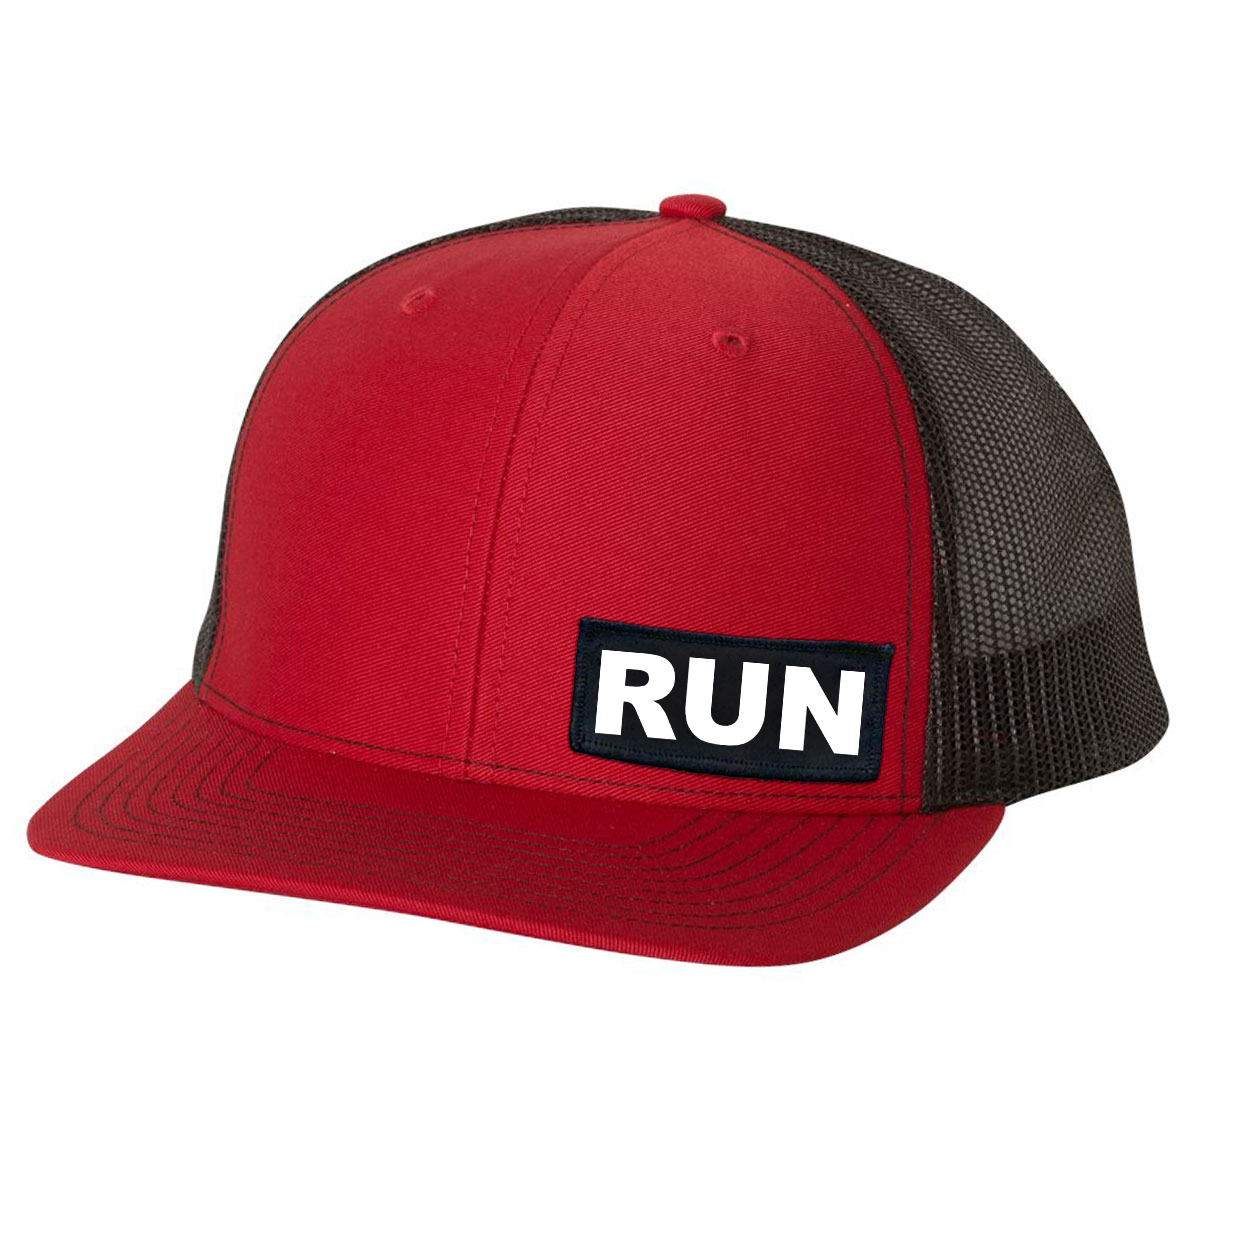 Run Brand Logo Night Out Woven Patch Snapback Trucker Hat Red/Black